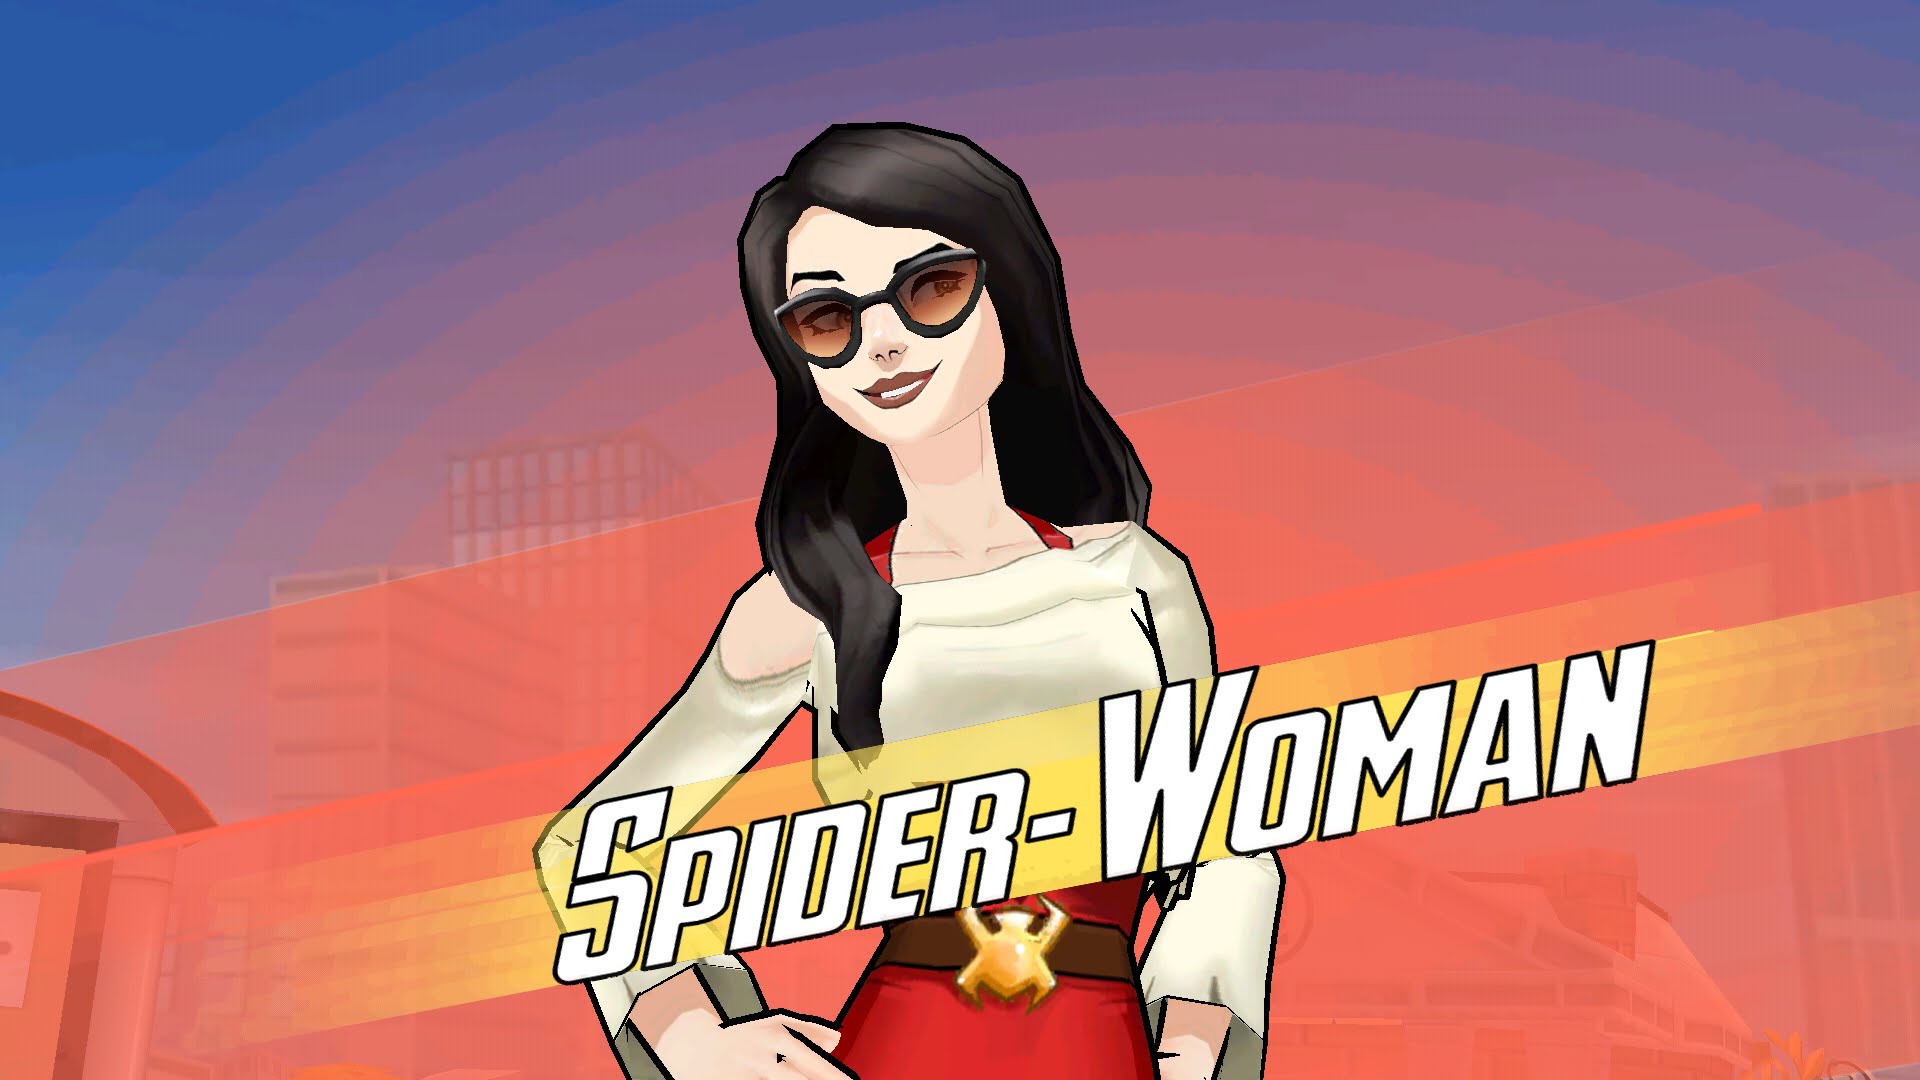 Images of Spider-Woman | 1920x1080